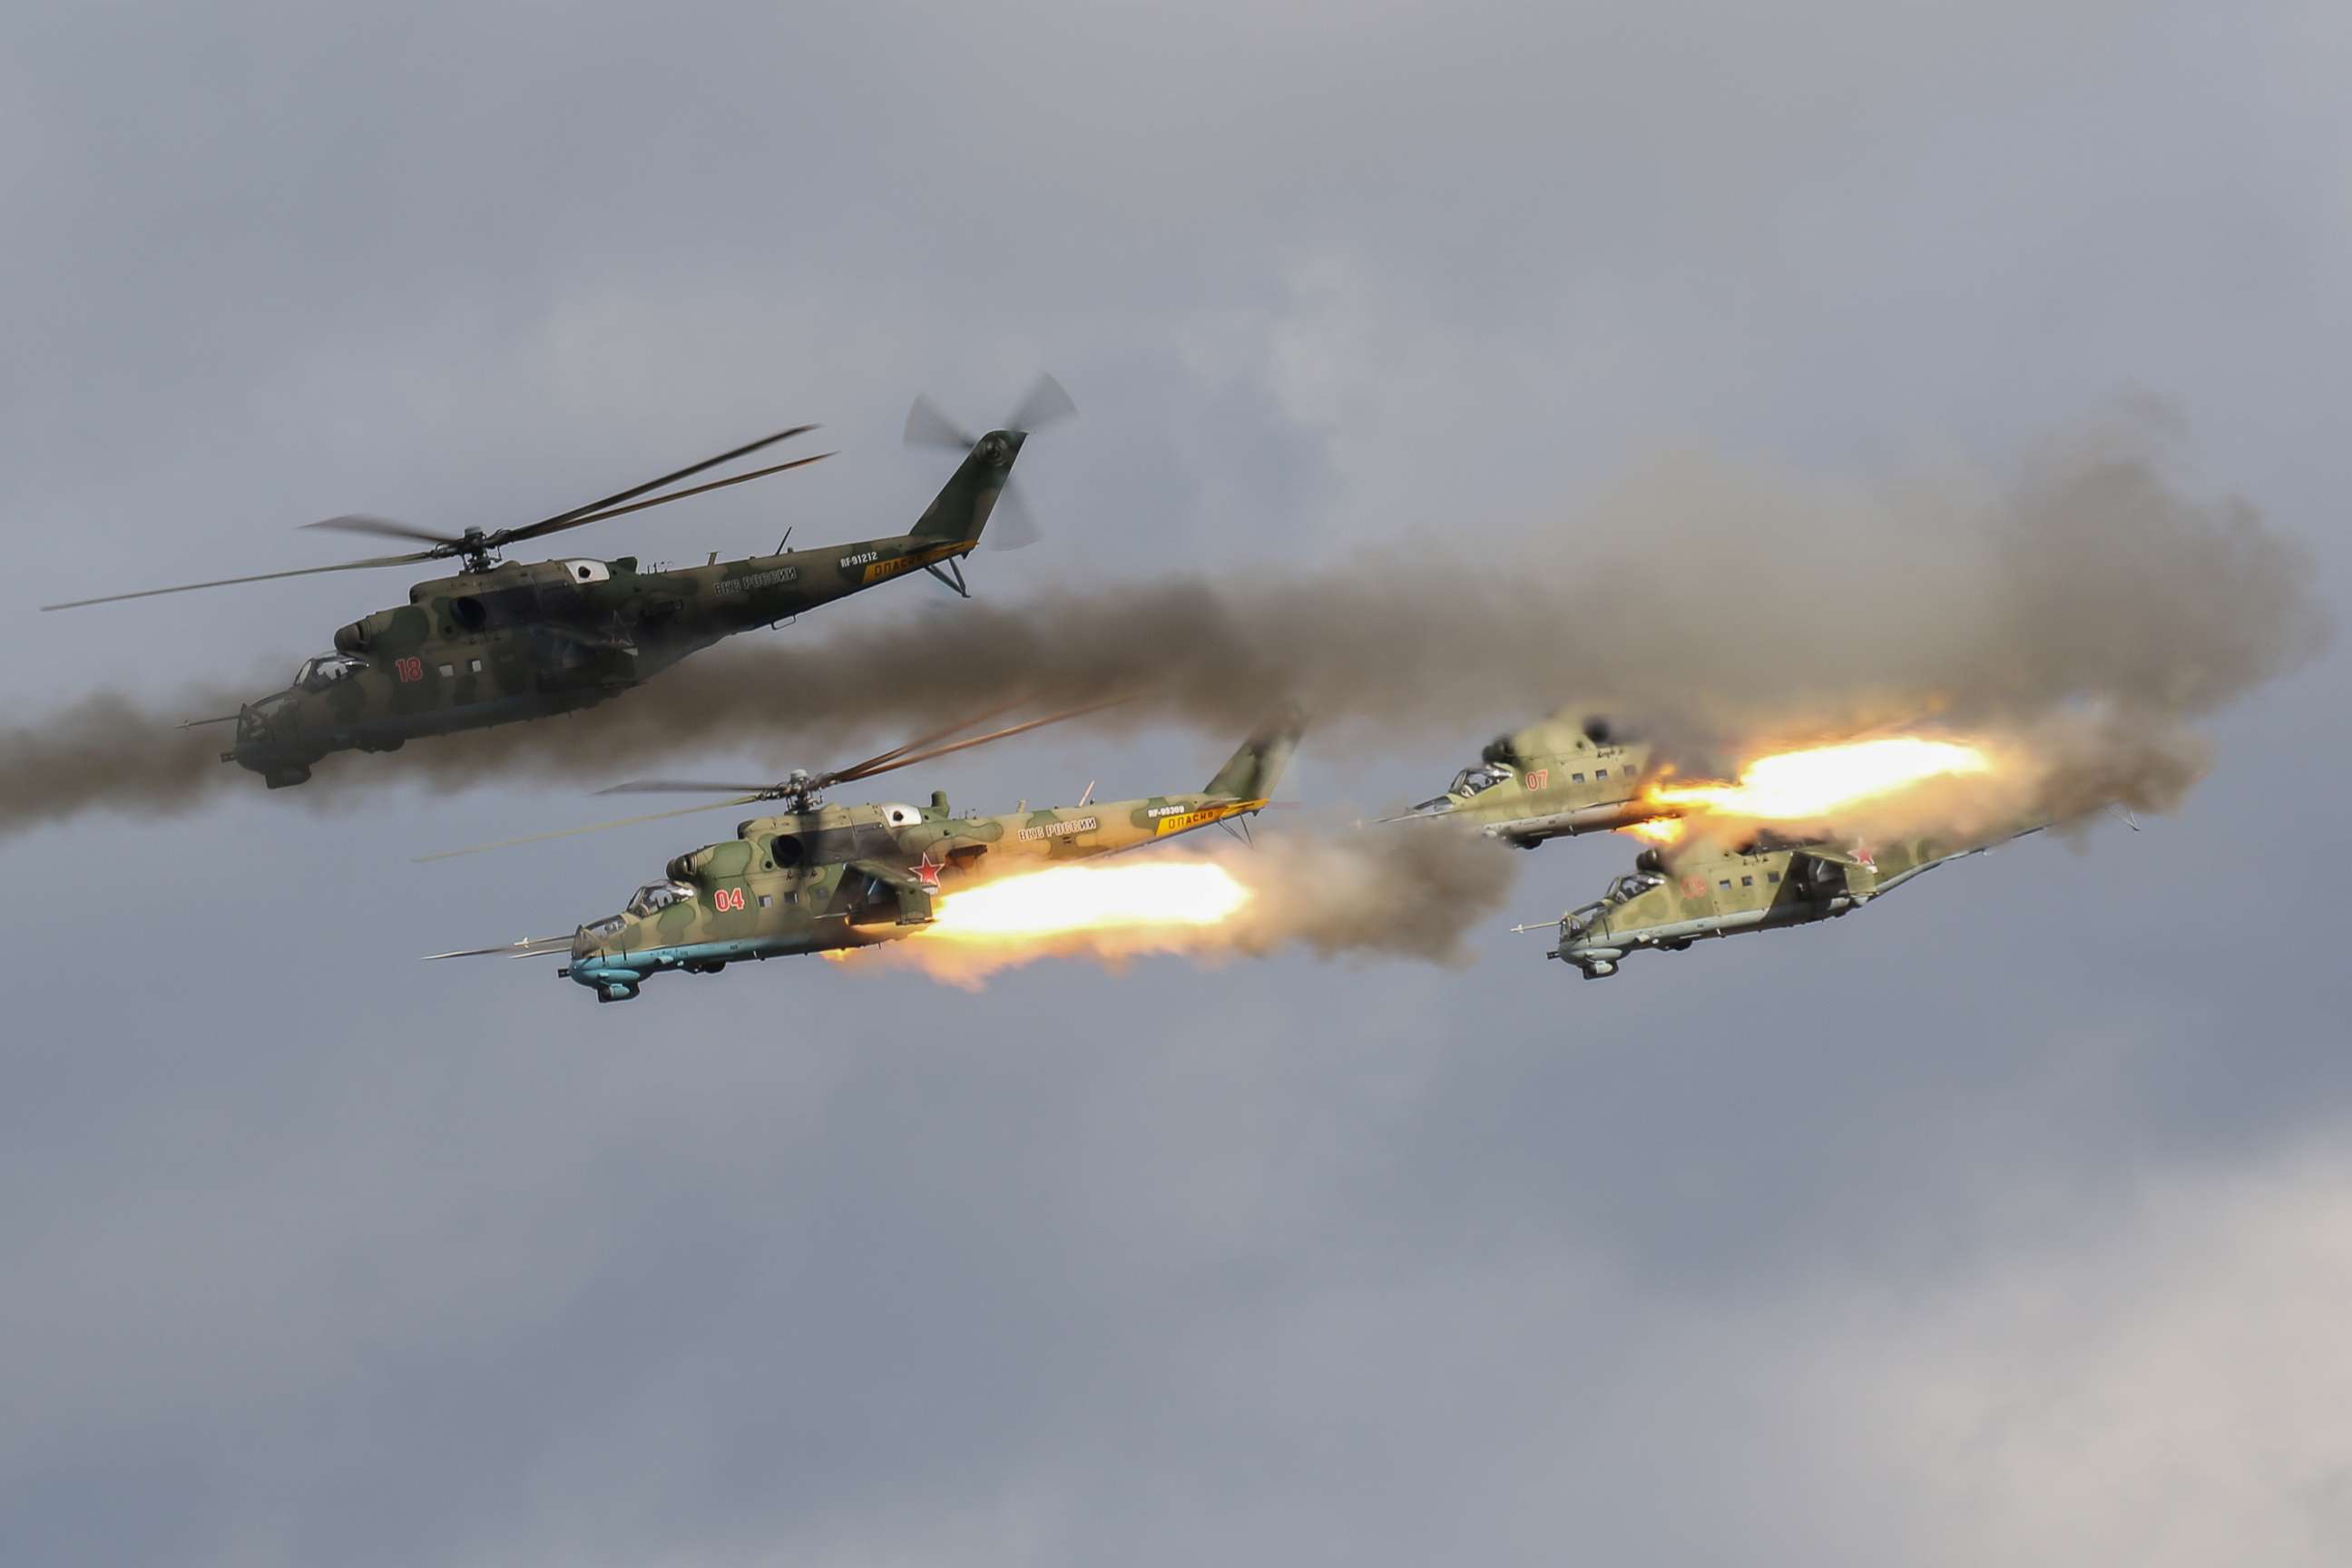 PHOTO: Russian MI-24 attack helicopters fire rockets during the active phase of the military exercises "Zapad-2021" staged by the armed forces of Russia and Belarus at the Mulino training ground in Nizhny Novgorod Region, Russia, Sept. 7, 2021.